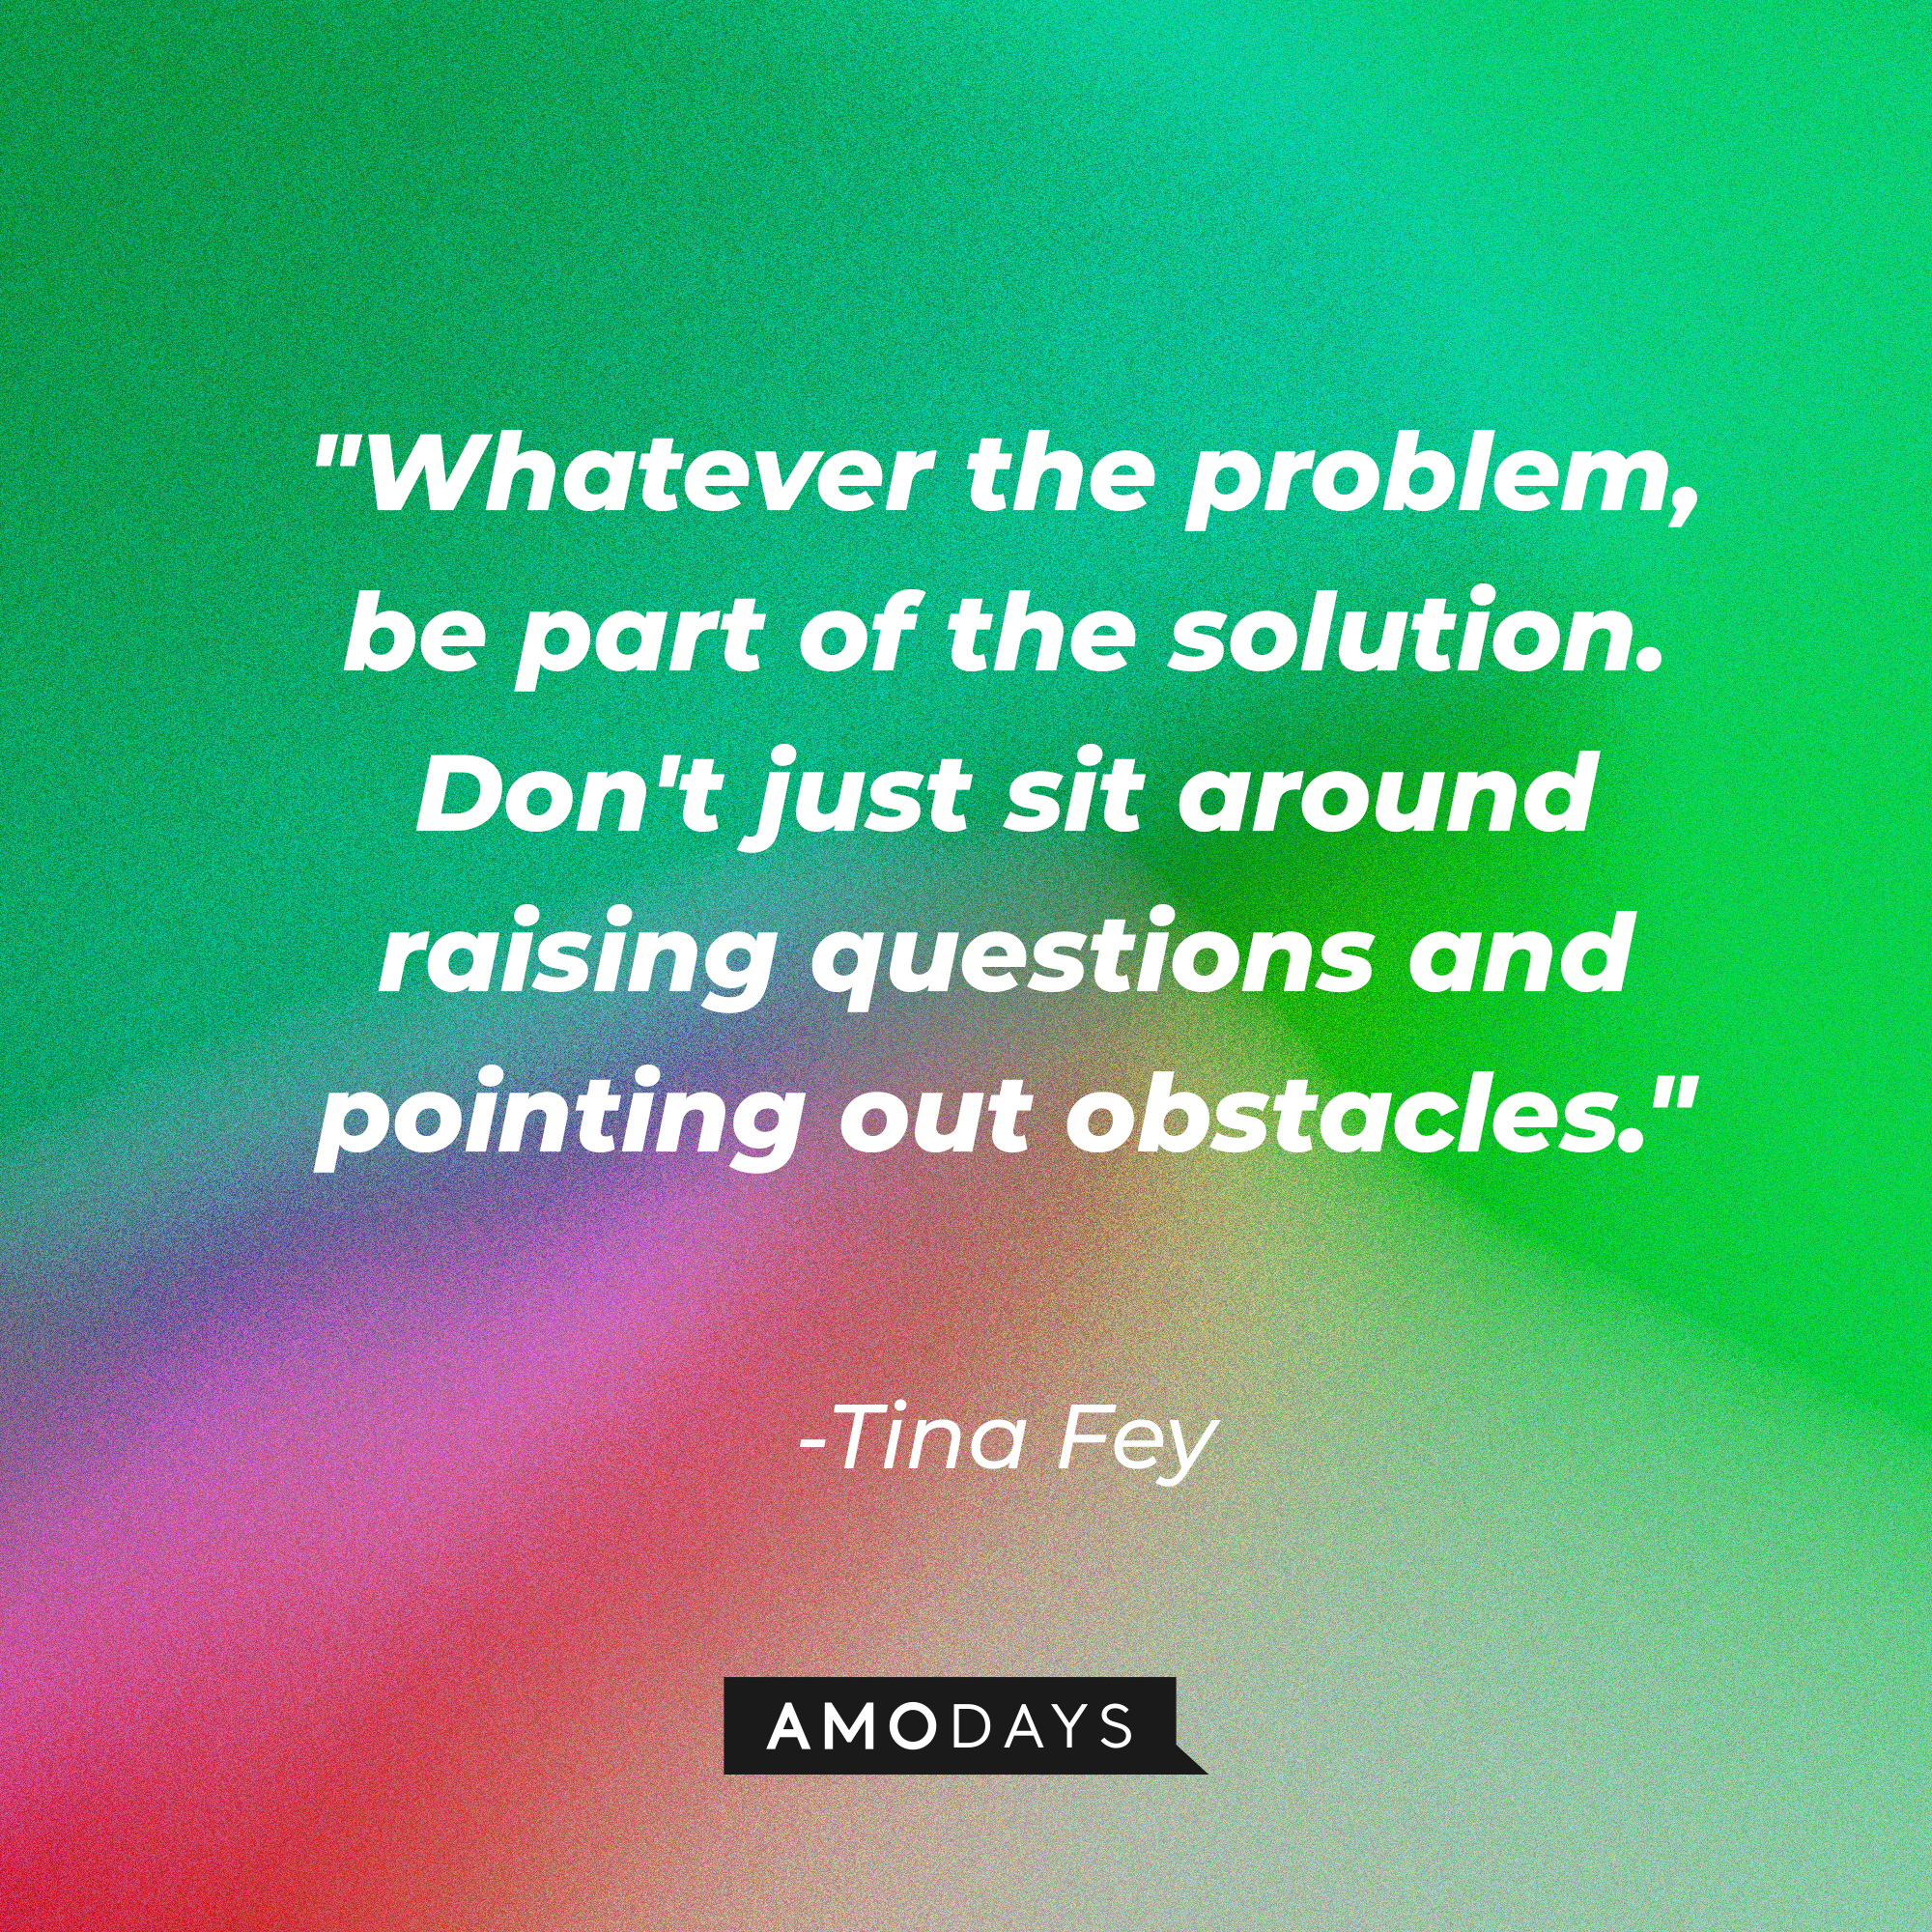 Tina Fey's quote: "Whatever the problem, be part of the solution. Don't just sit around raising questions and pointing out obstacles." | Source: AmoDays